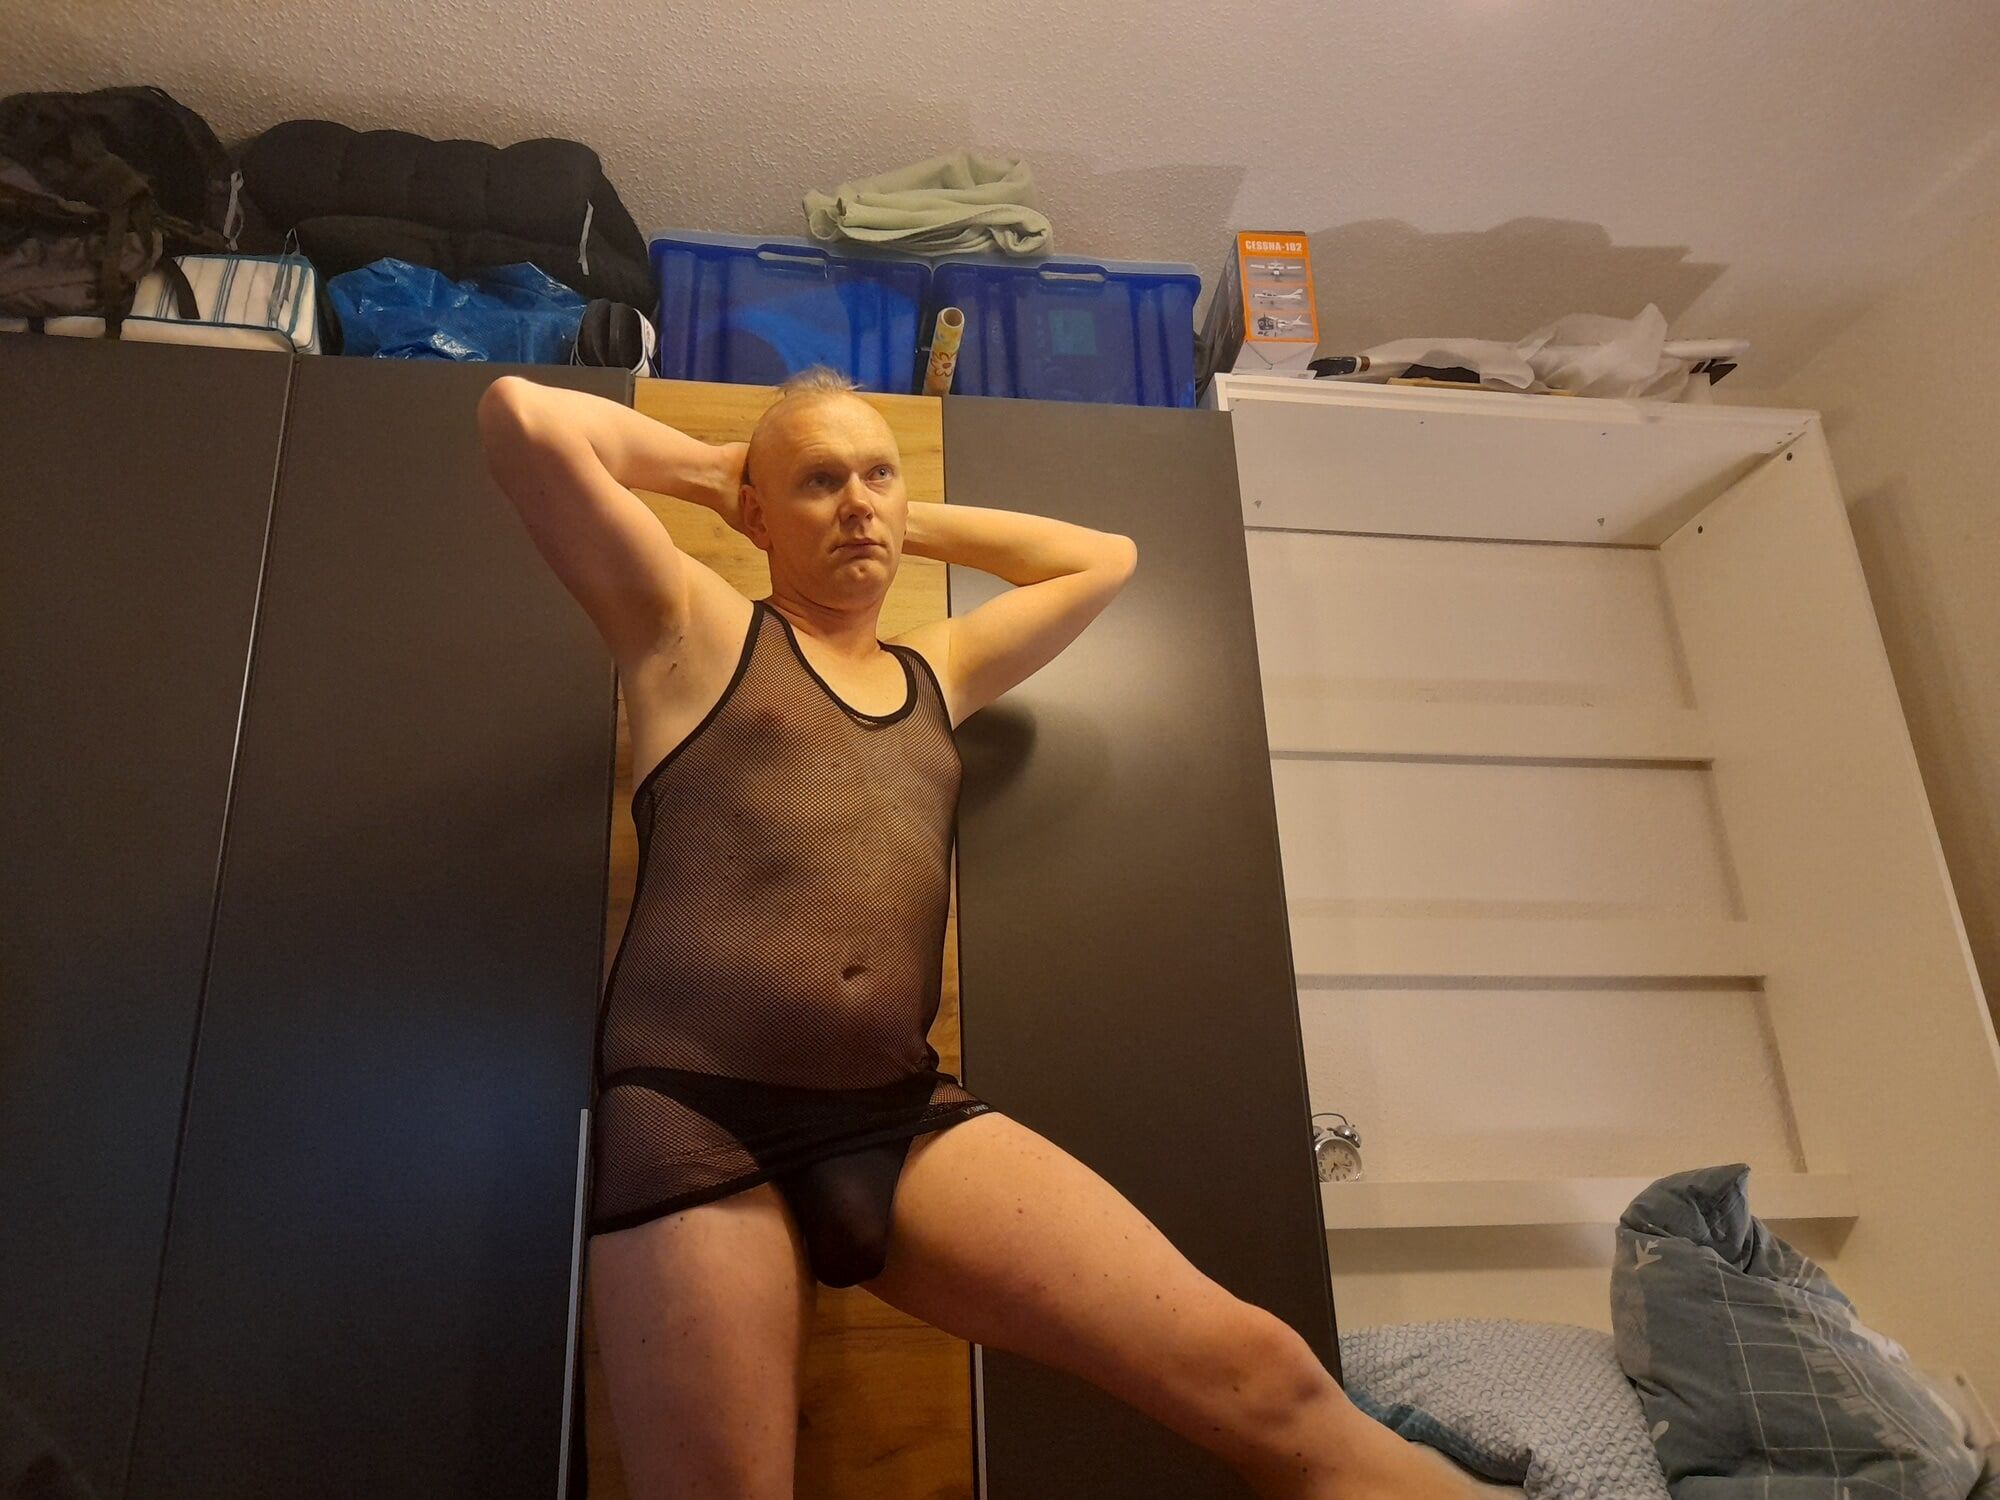 breitbein88 in hooker dress - Would you fuck him?